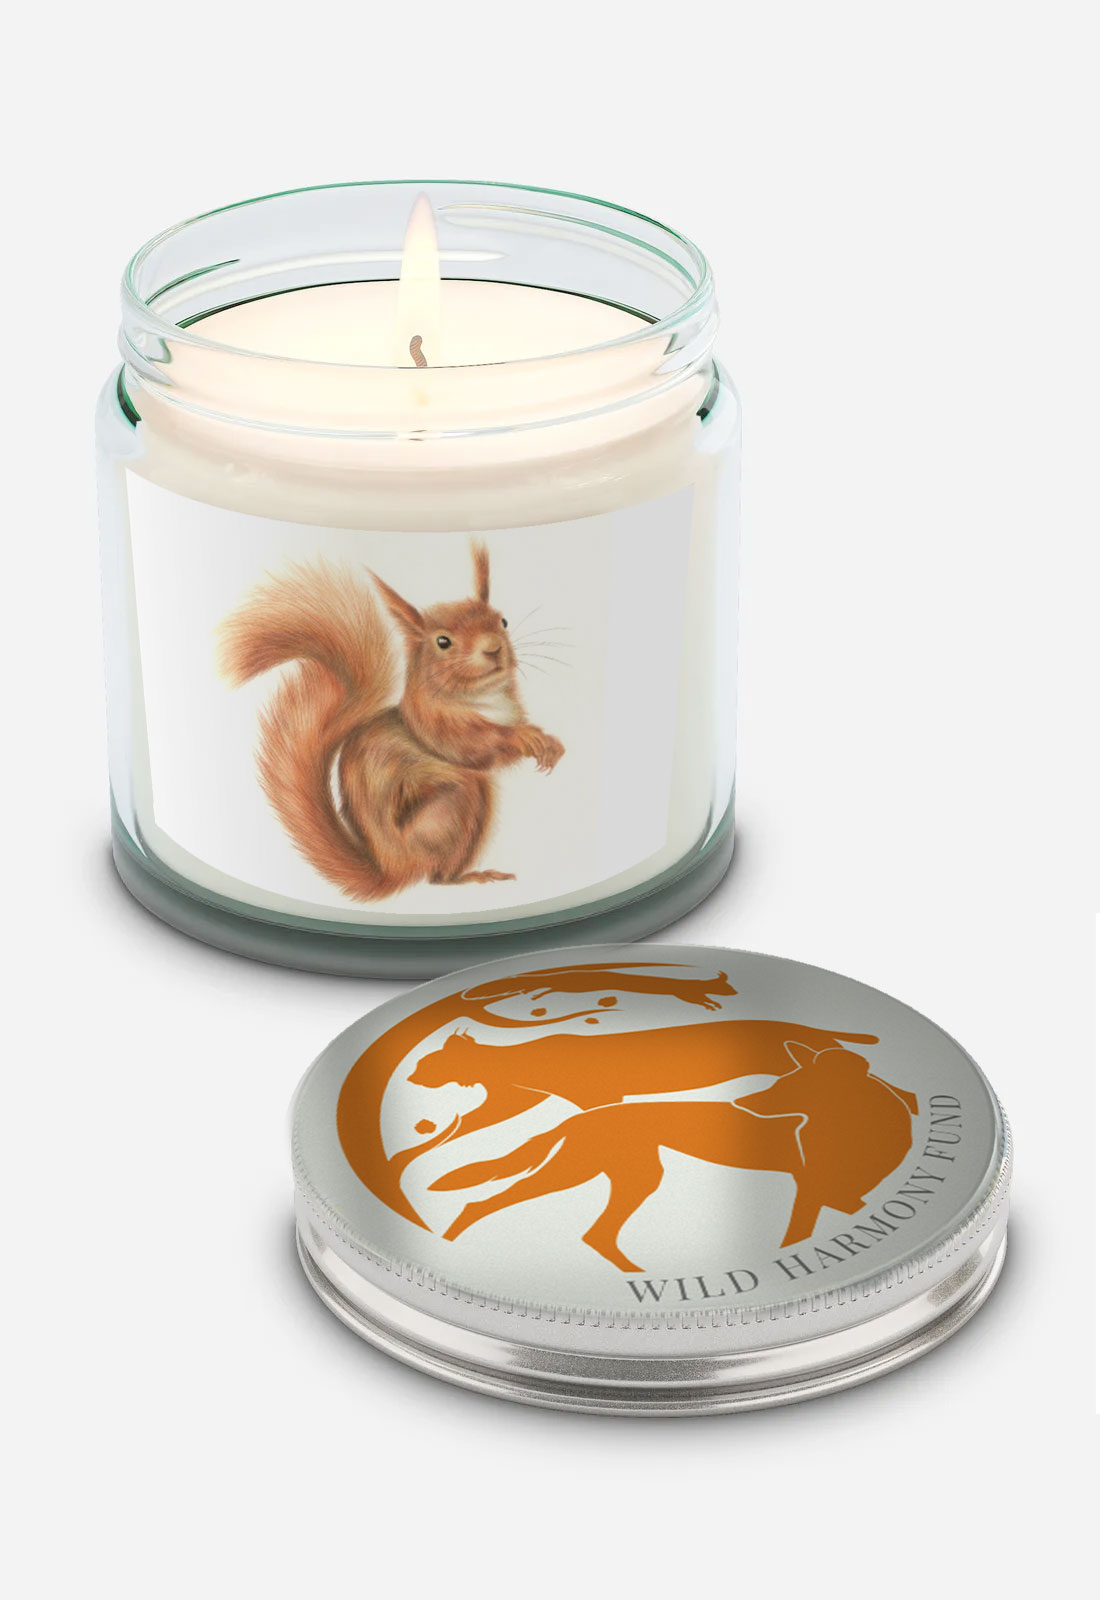 Main image for Red Squirrel Candle